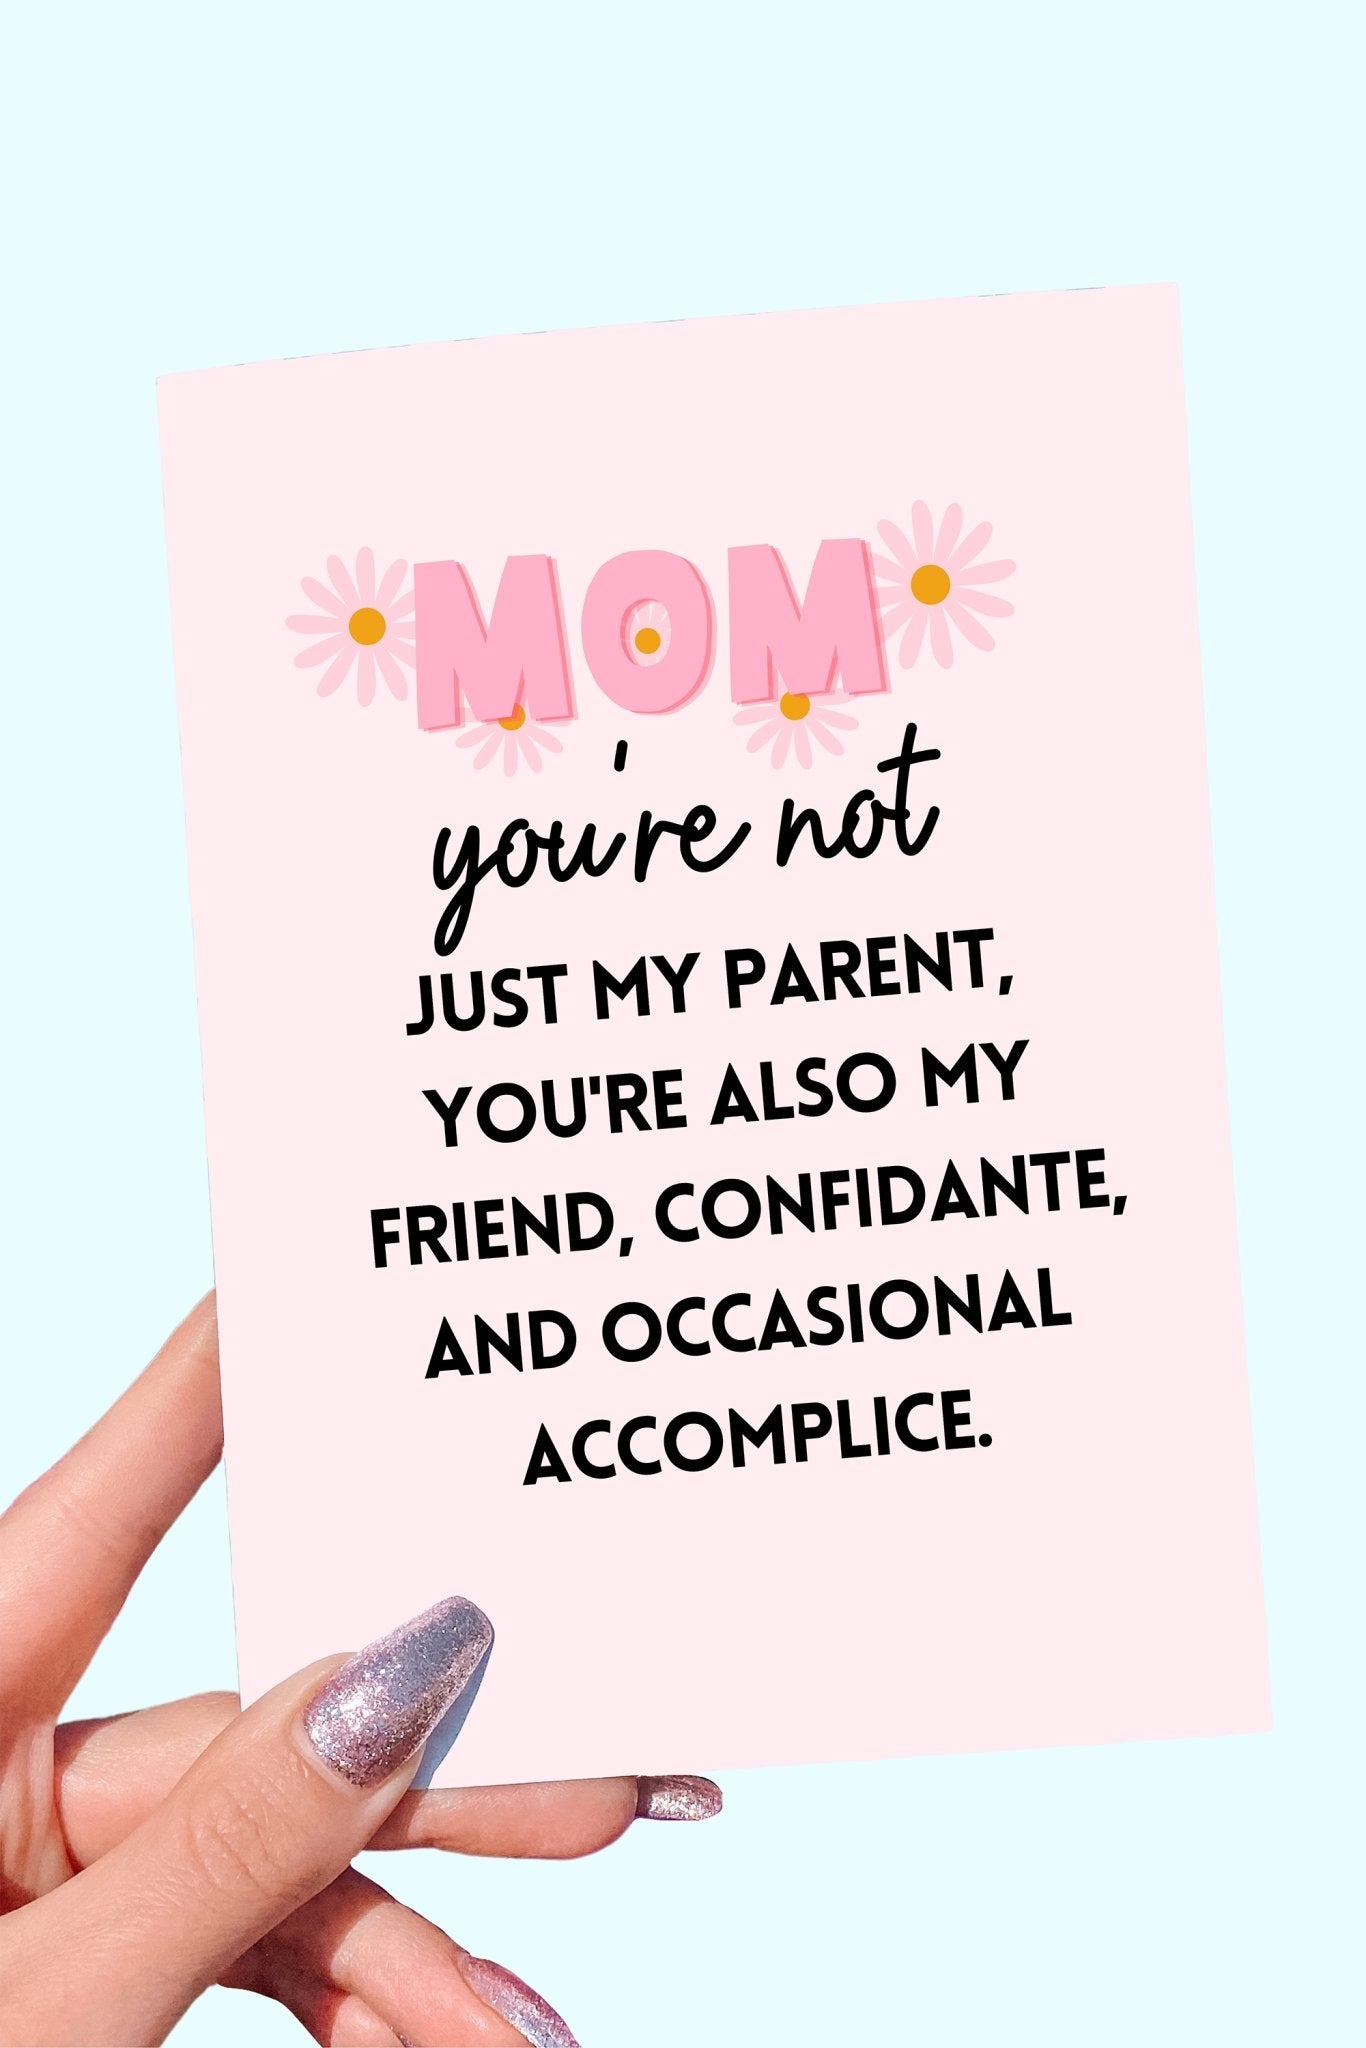 https://cdn.shopify.com/s/files/1/2169/8635/products/mom-youre-not-just-my-parent-mothers-day-card-368850.jpg?v=1678882142&width=1366